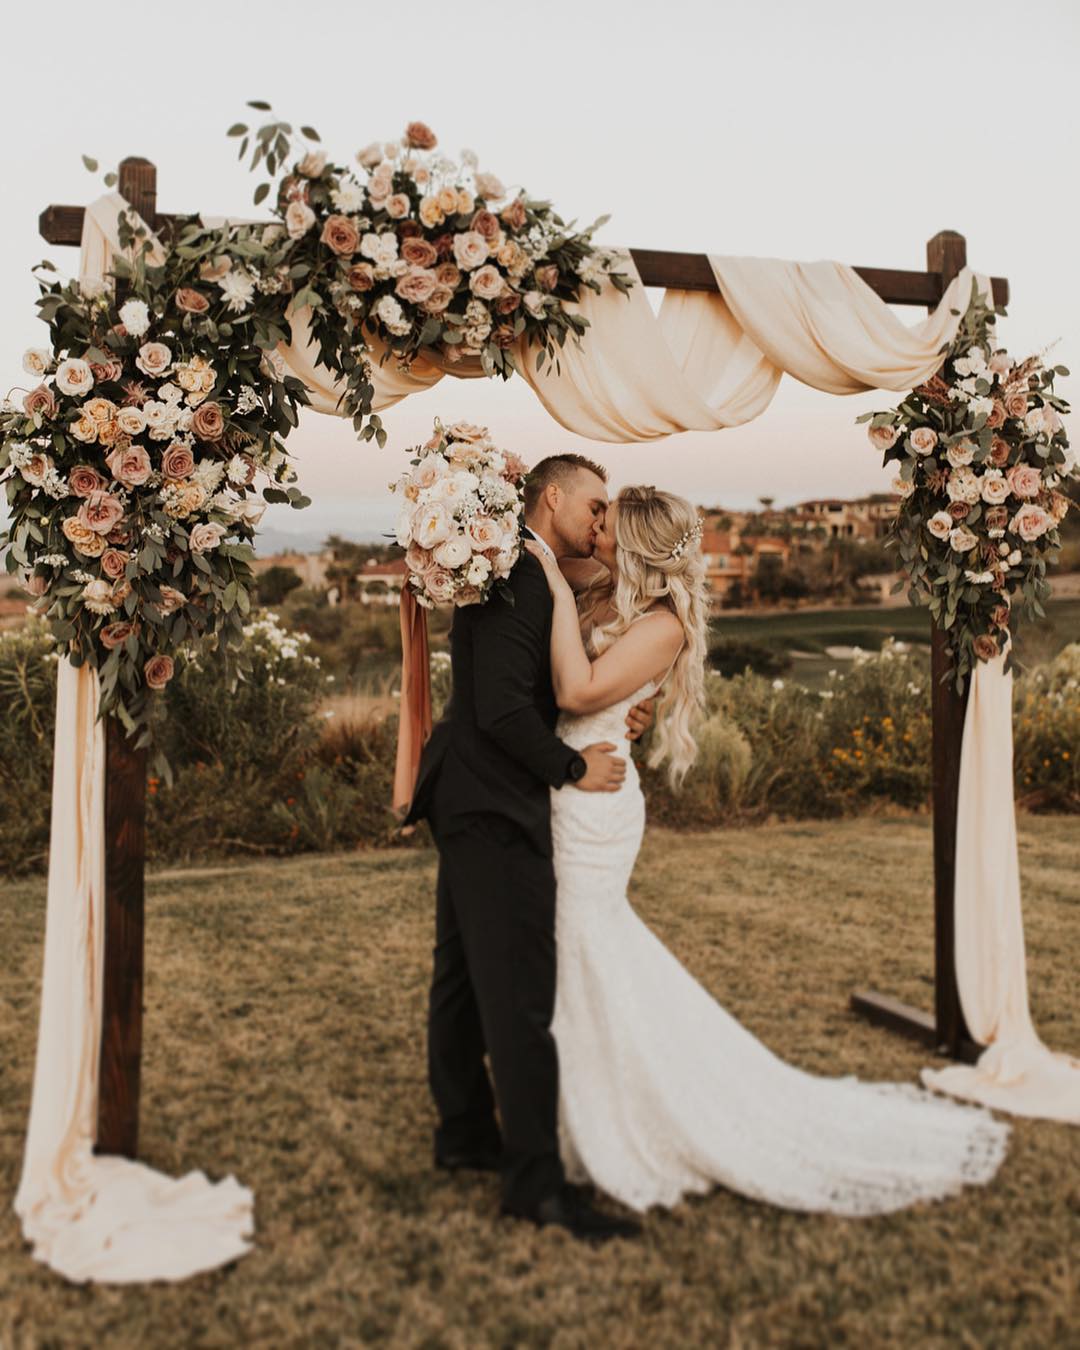 rustic dusty rose wooden wedding arch with roses and fabric drapes